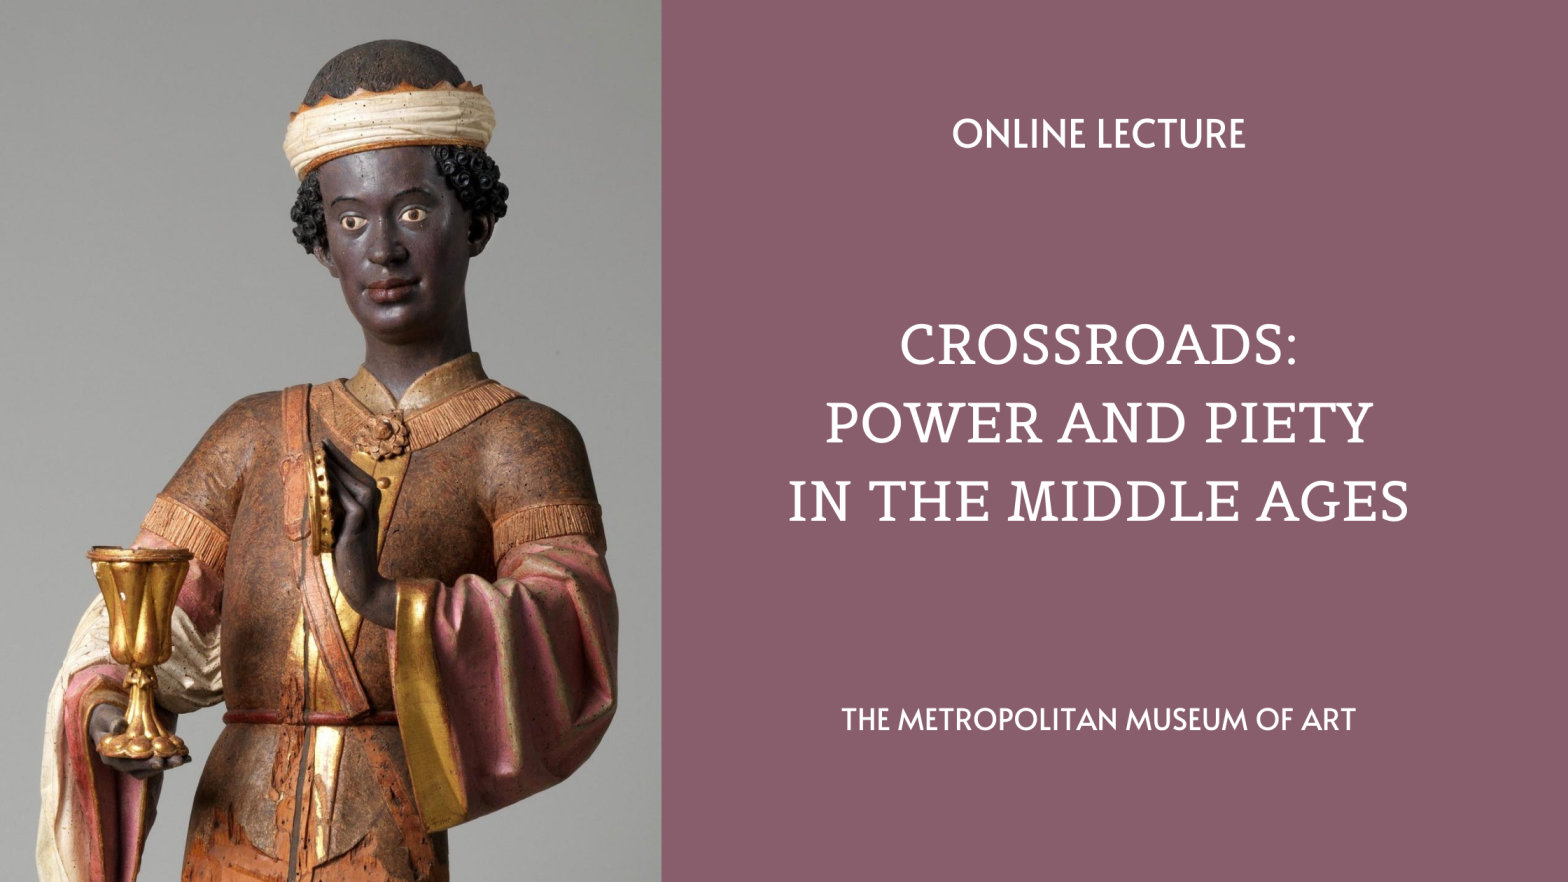 Online Lecture - Crossroads: Power and Piety in the Middle Ages